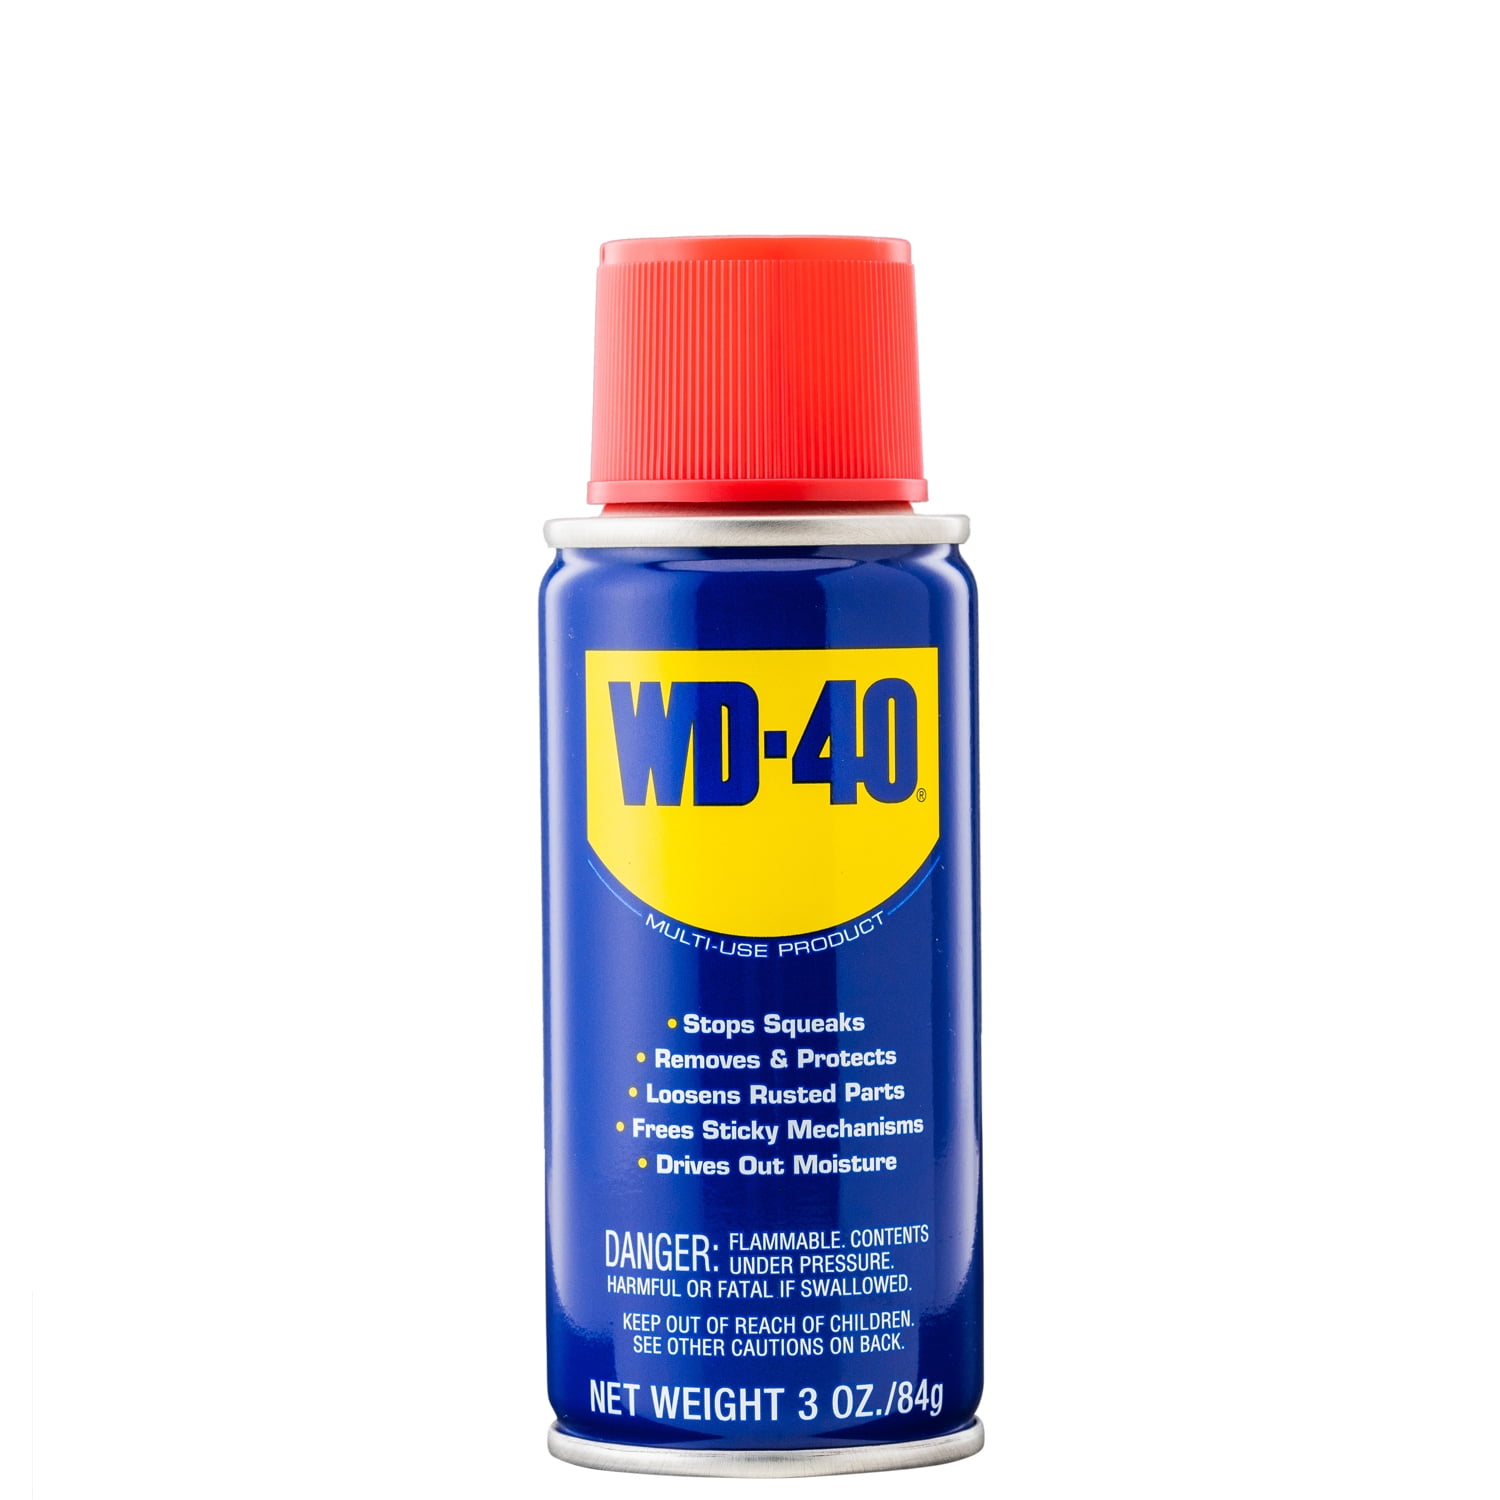 WD-40 Multi-Use Product and WD-40 Specialist Silicone Lubricant Combo Pack  (Pack of 2) & Electrical Contact Cleaner Spray - Electronic & Electrical  Equipment Cleaner. 11 oz. (Pack of 1) - 300554-E: 